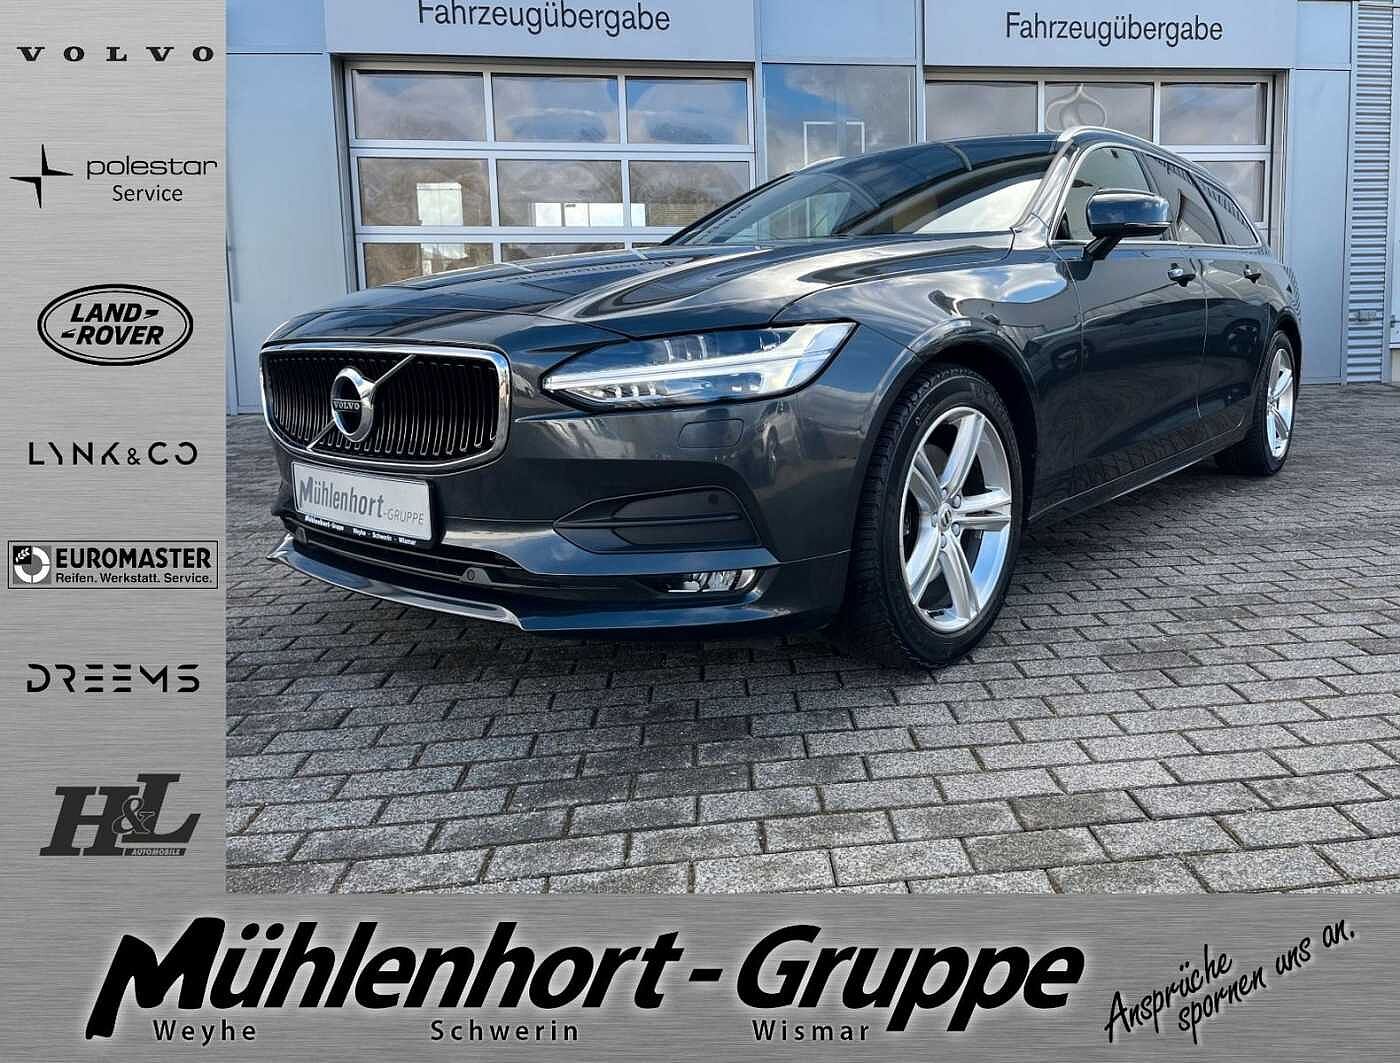 Volvo  D4  Geartronic MOMENTUM PRO - Sthzg - Pano -